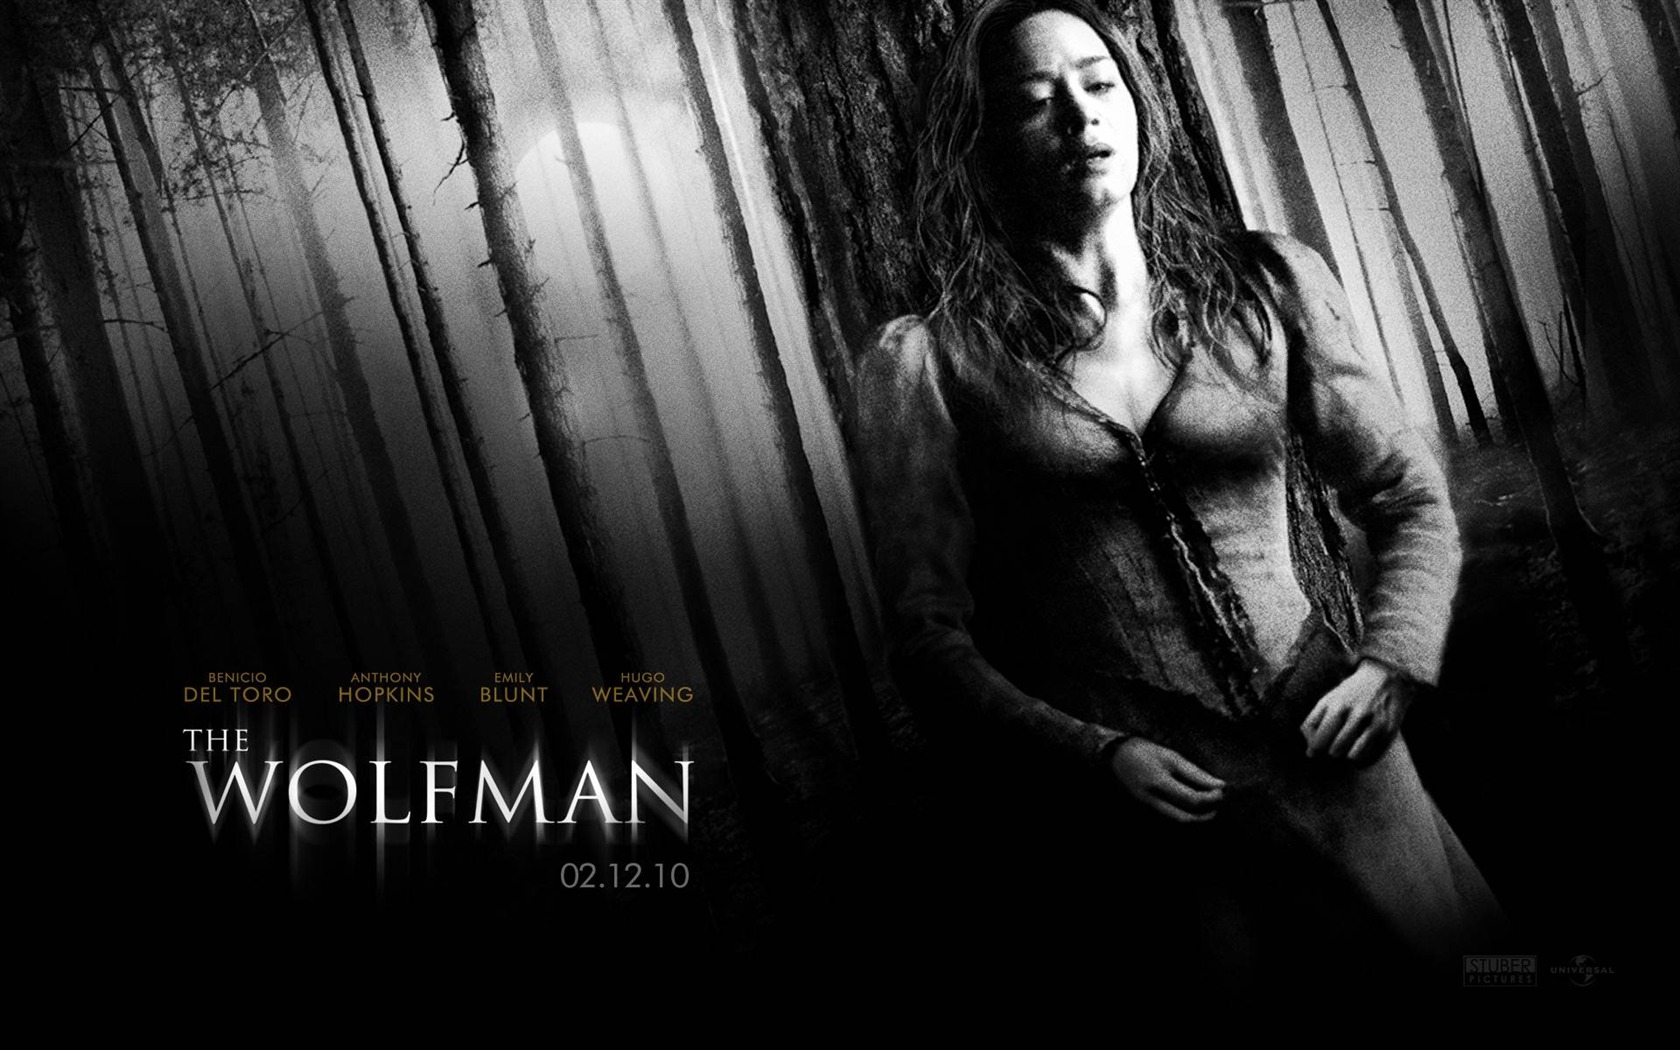 The Wolfman Movie Wallpapers #10 - 1680x1050